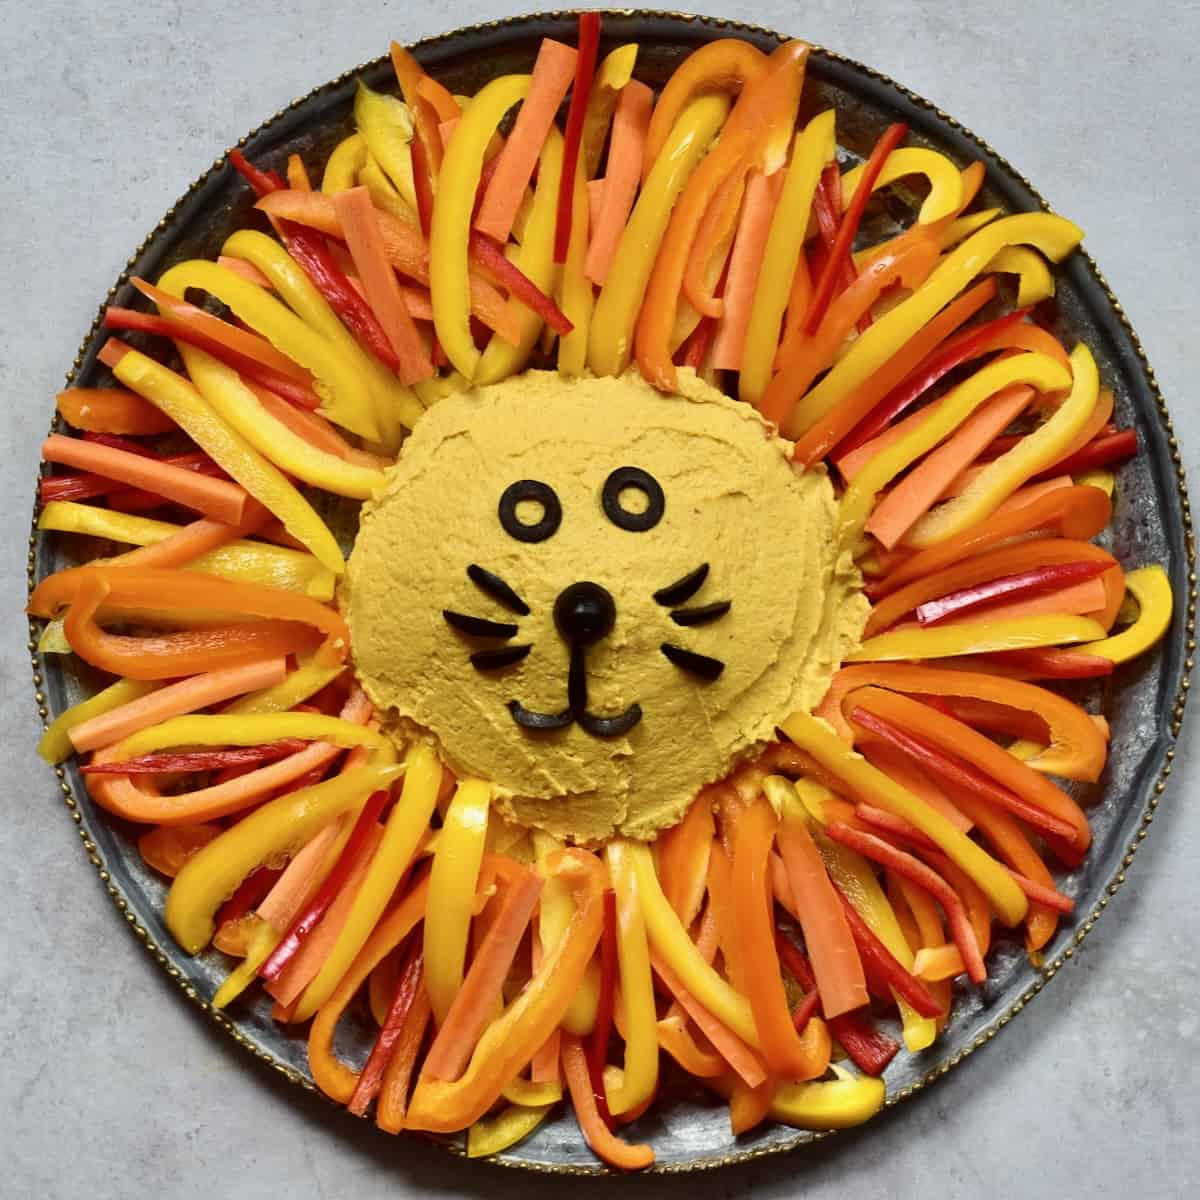 Pumpkin hummus served with bell pepper slices and olives organized as lion's face